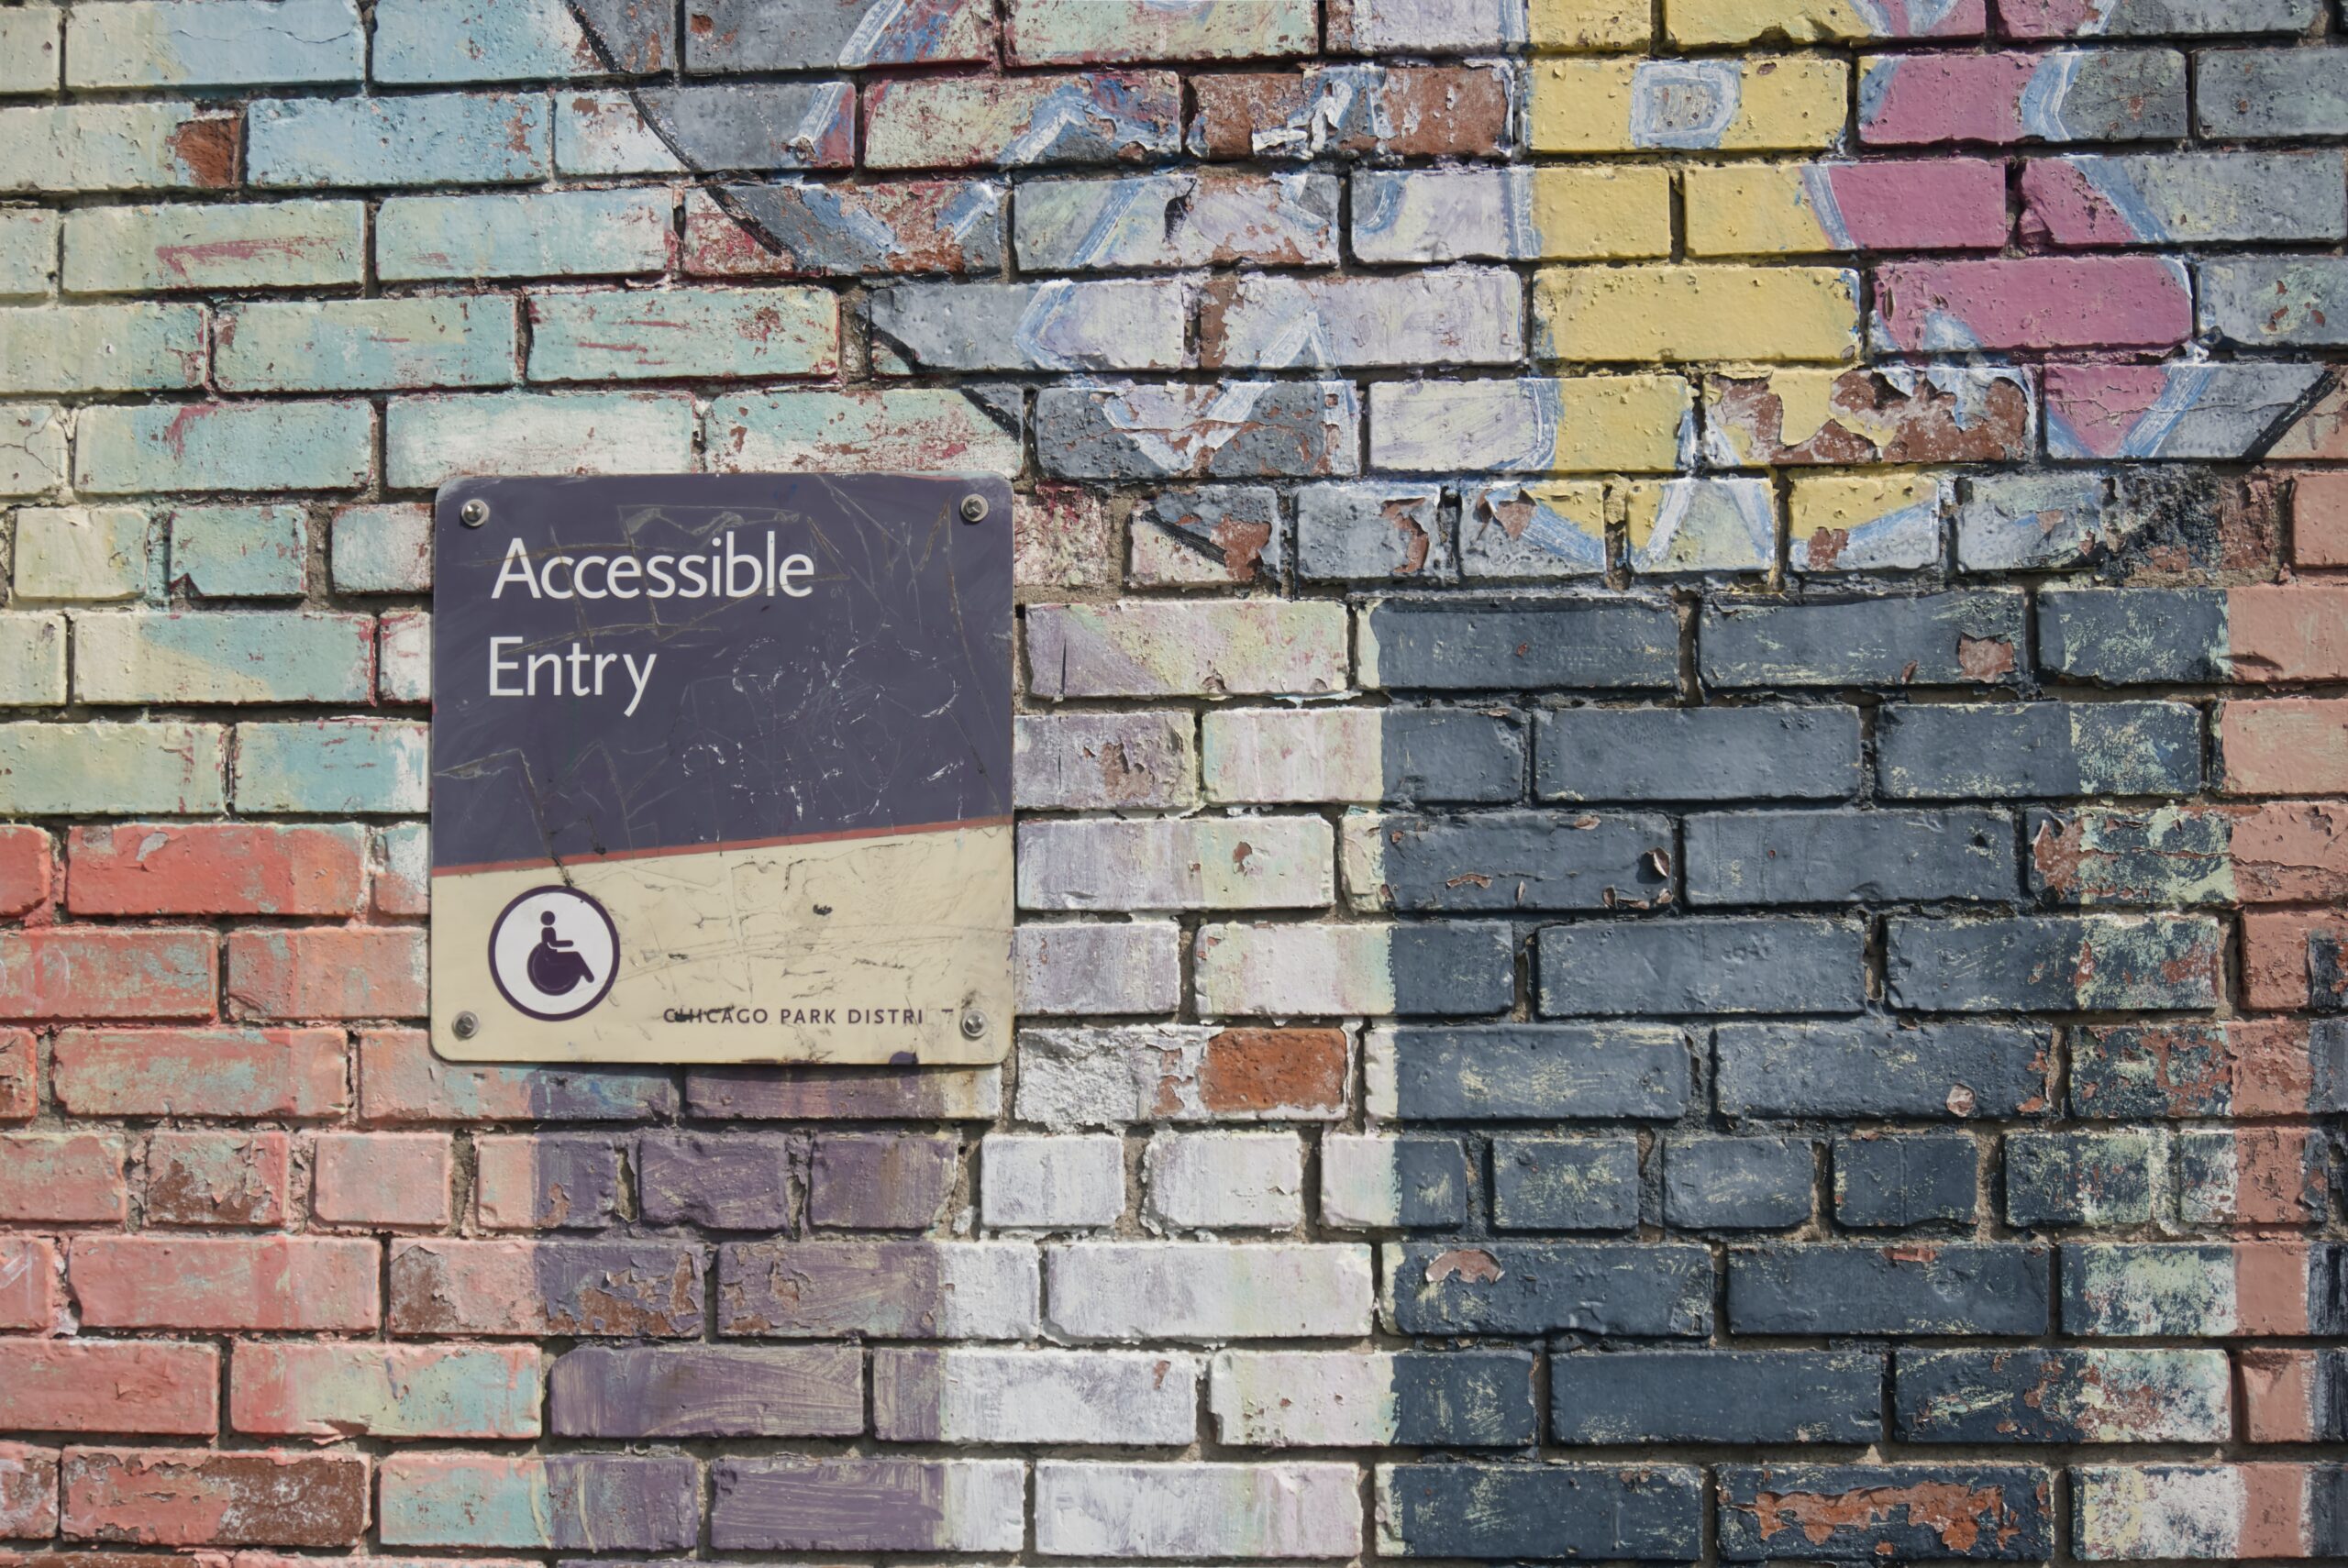 Accessible sign on brick wall covered in graffiti.